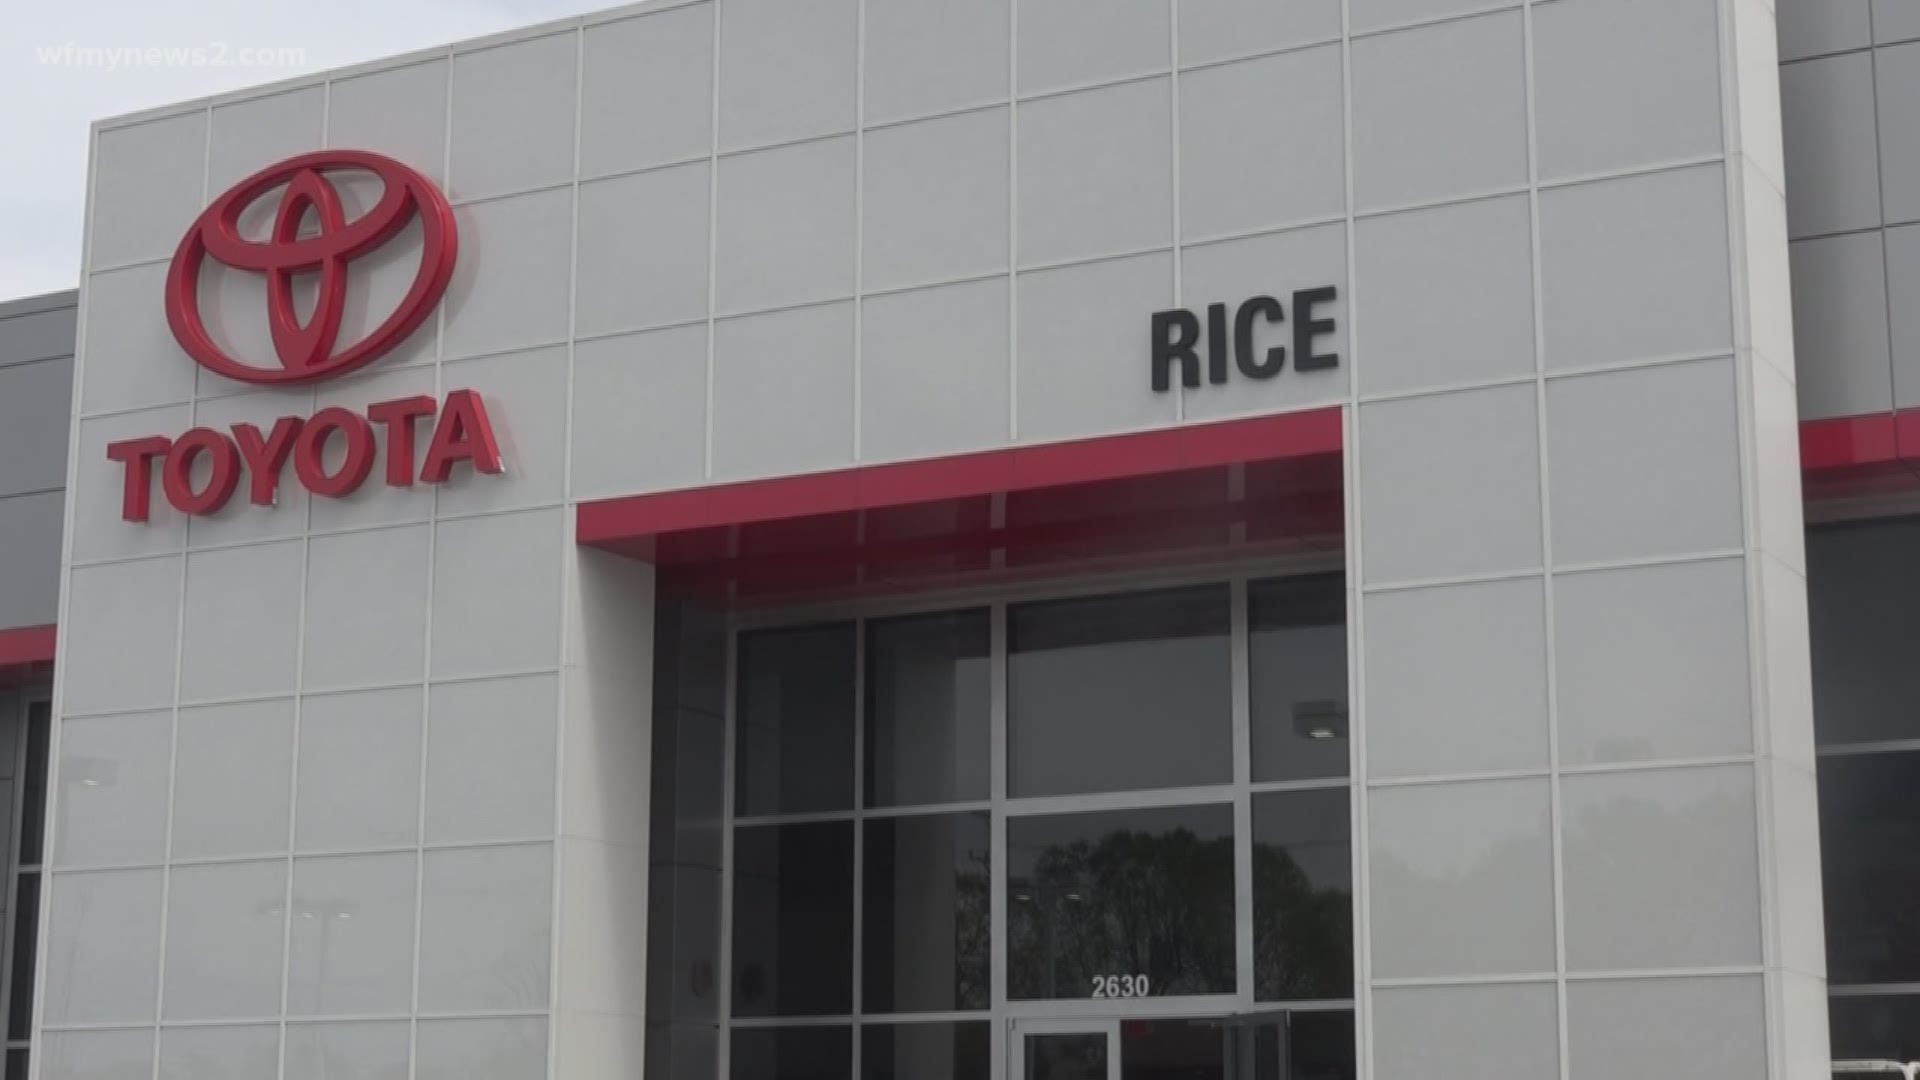 Rice Toyota in Greensboro extended its internet access to its parking lot. Any Guilford County family who has a child can park anywhere in the parking lot to access